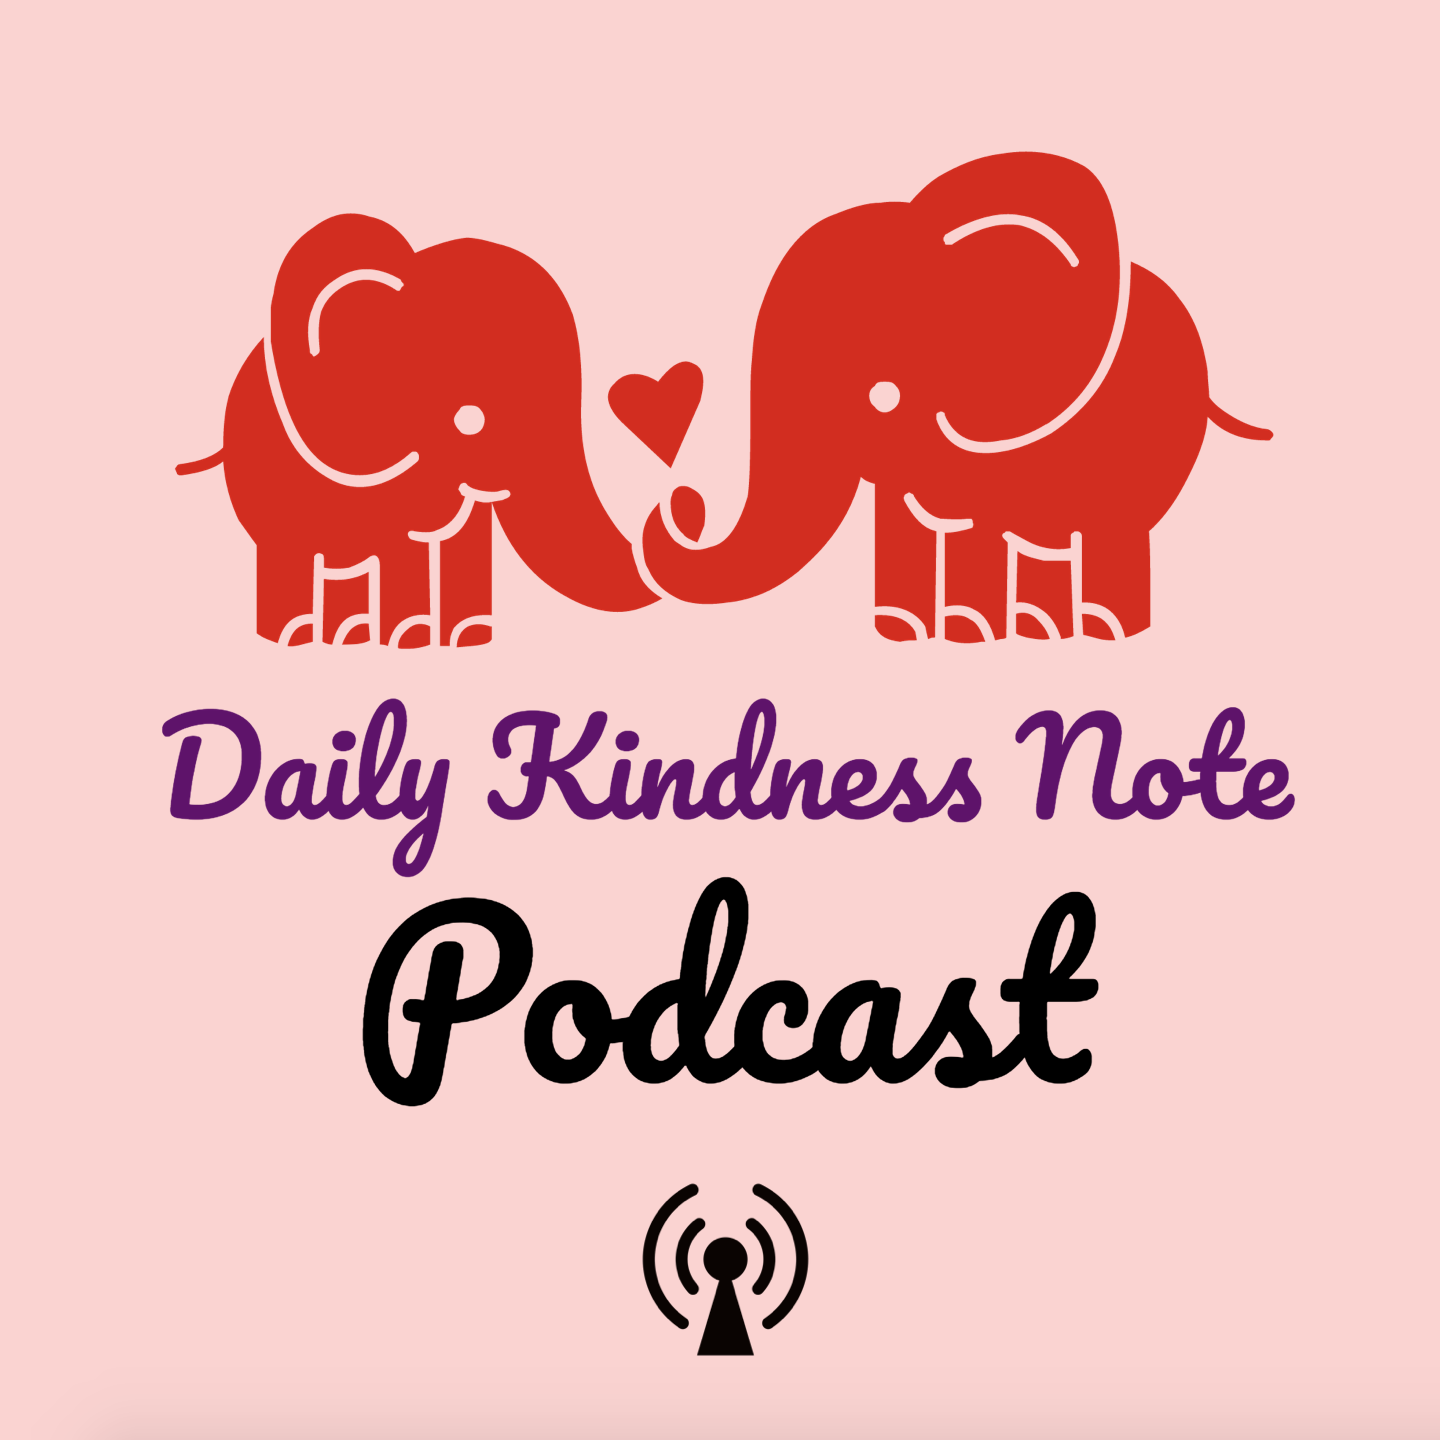 Daily Kindness Note Podcast - Ep. 11: Communicate Appreciation in a Natural Way